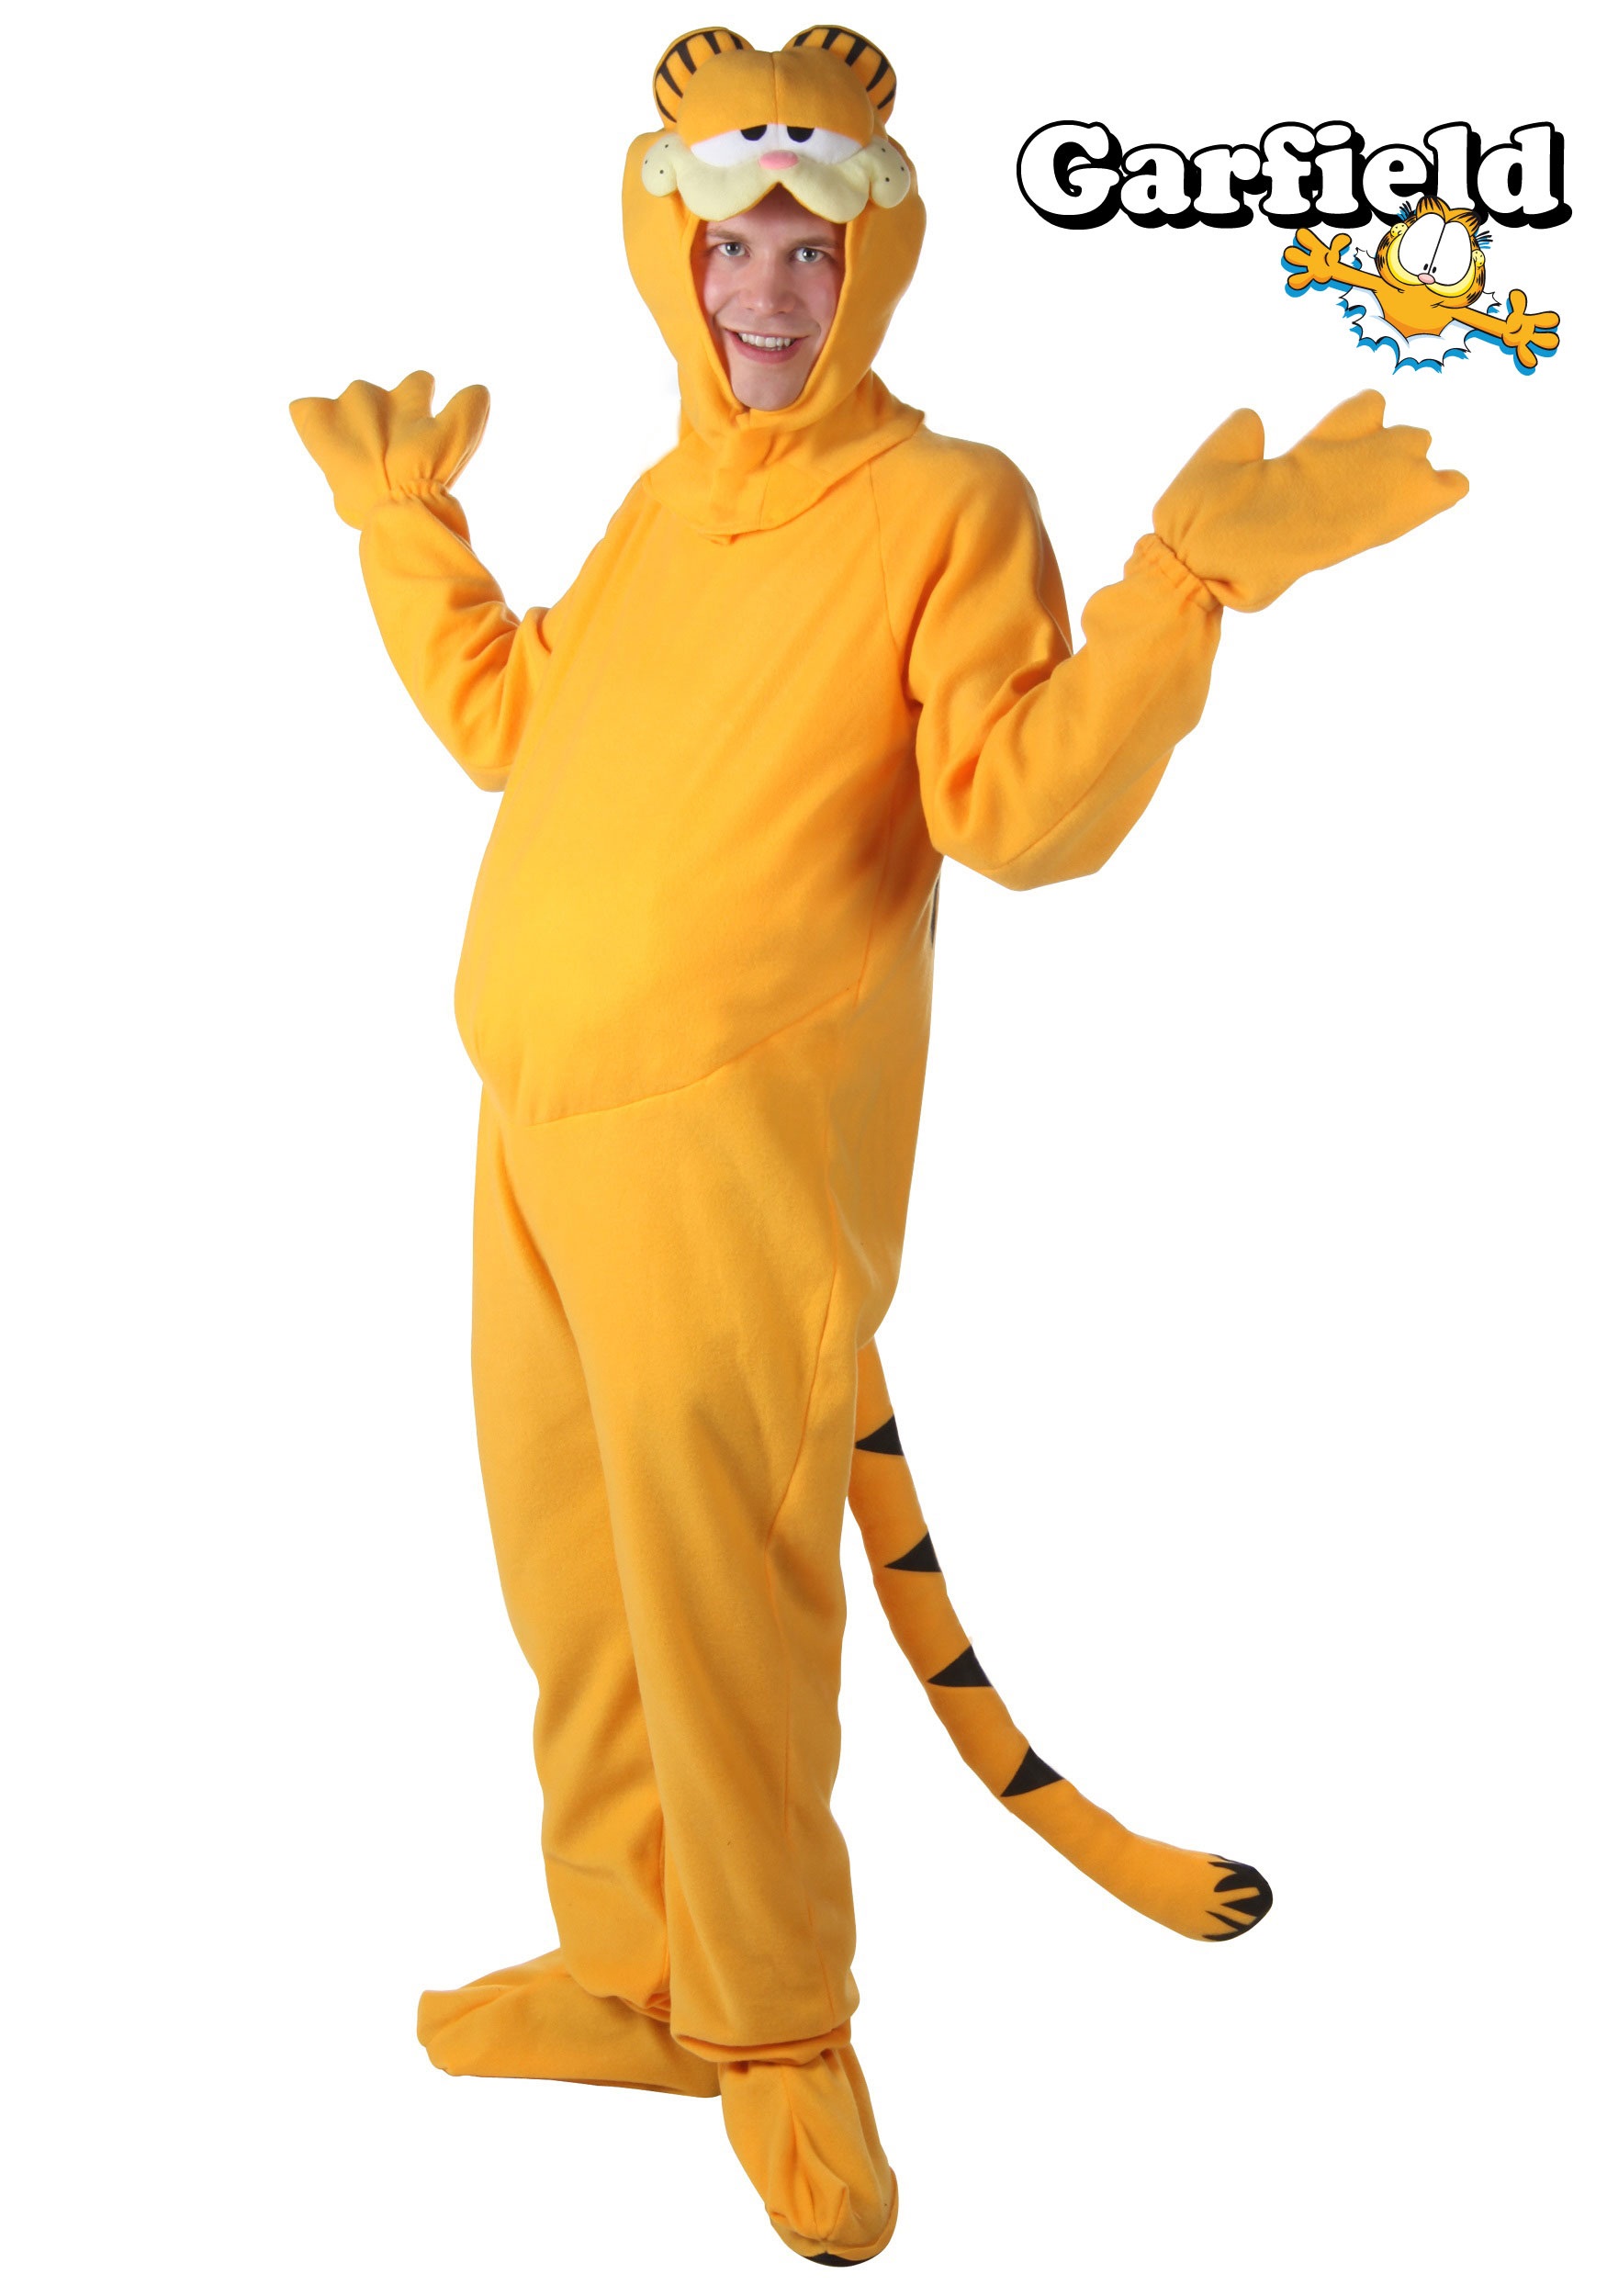 This adult Garfield costume makes a funny animal costume idea for Halloween...